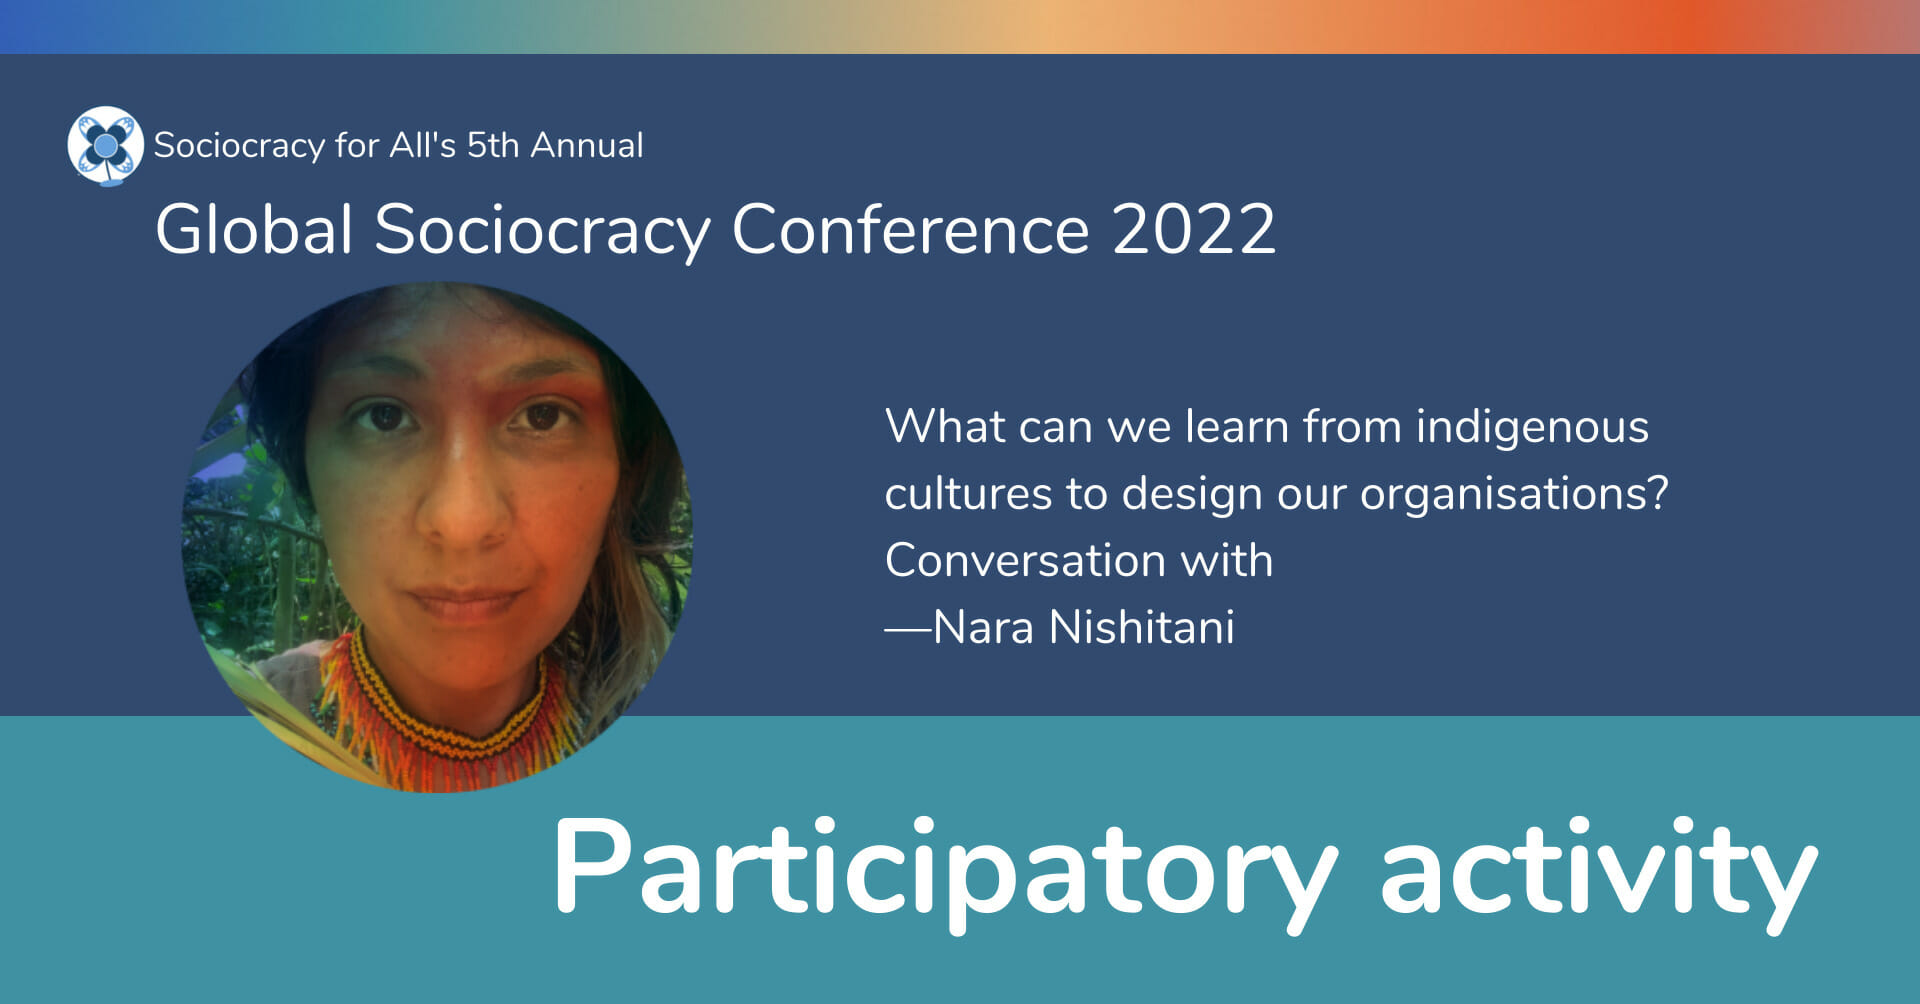 What can we learn from indigenous cultures to design our organisations? —Nara Nishitani